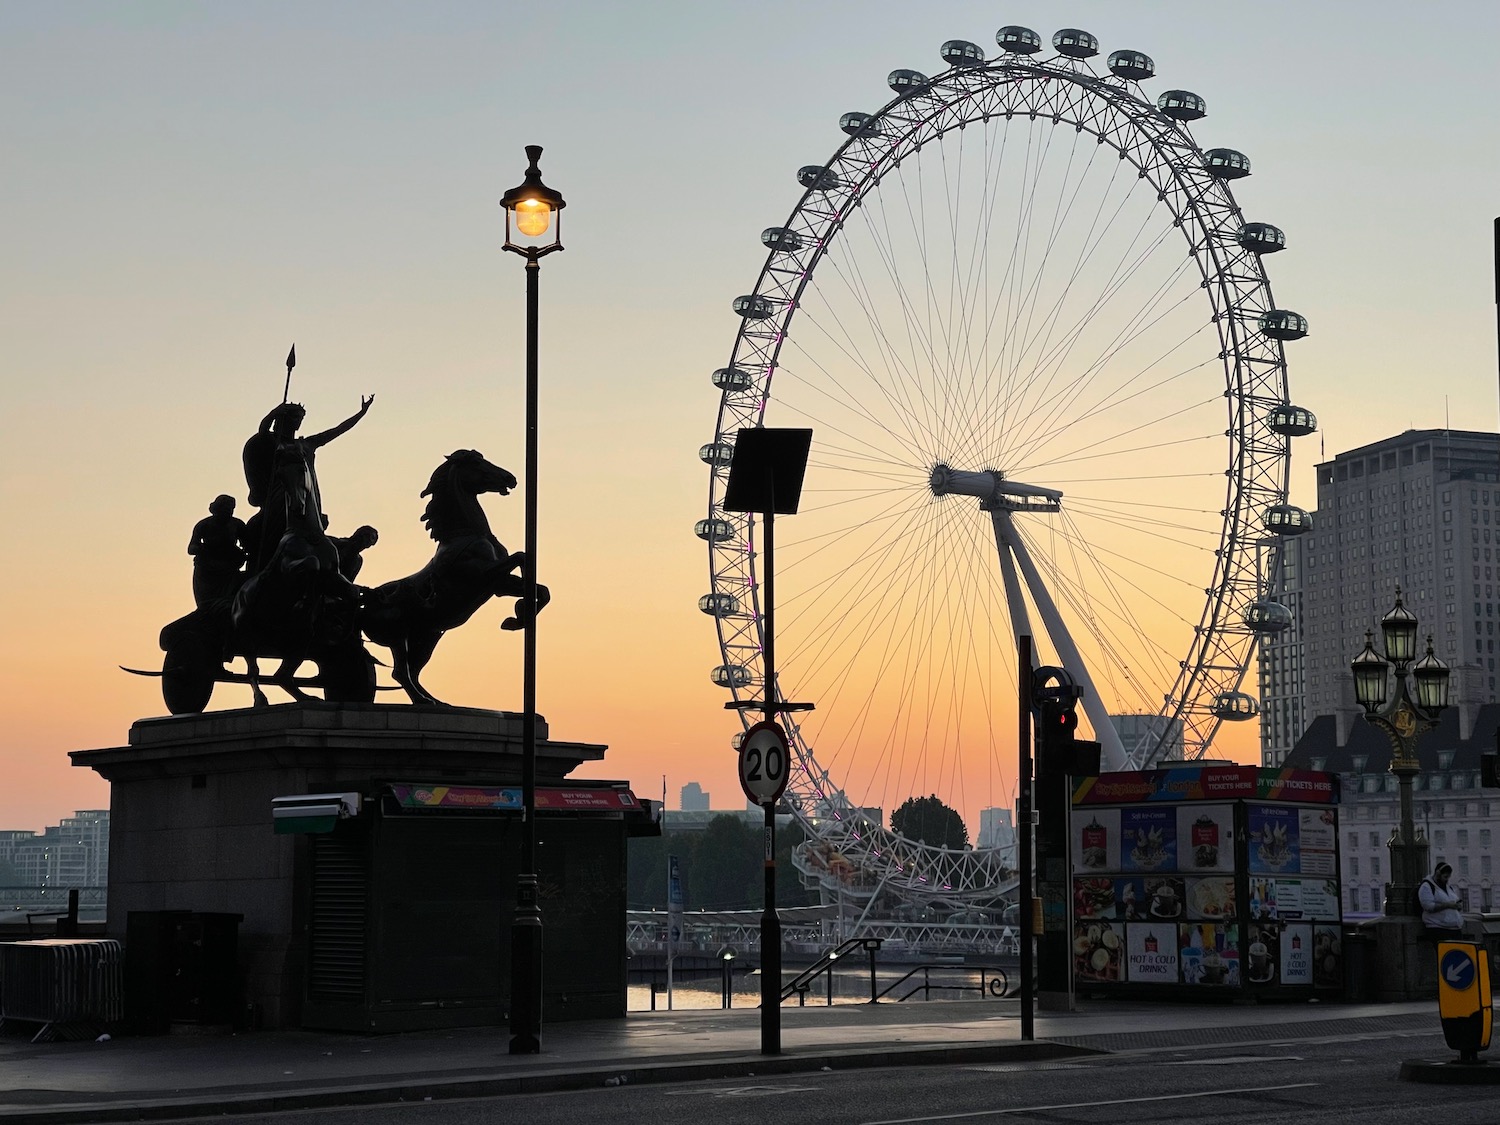 a statue of a man riding a horse and a ferris wheel with London Eye in the background